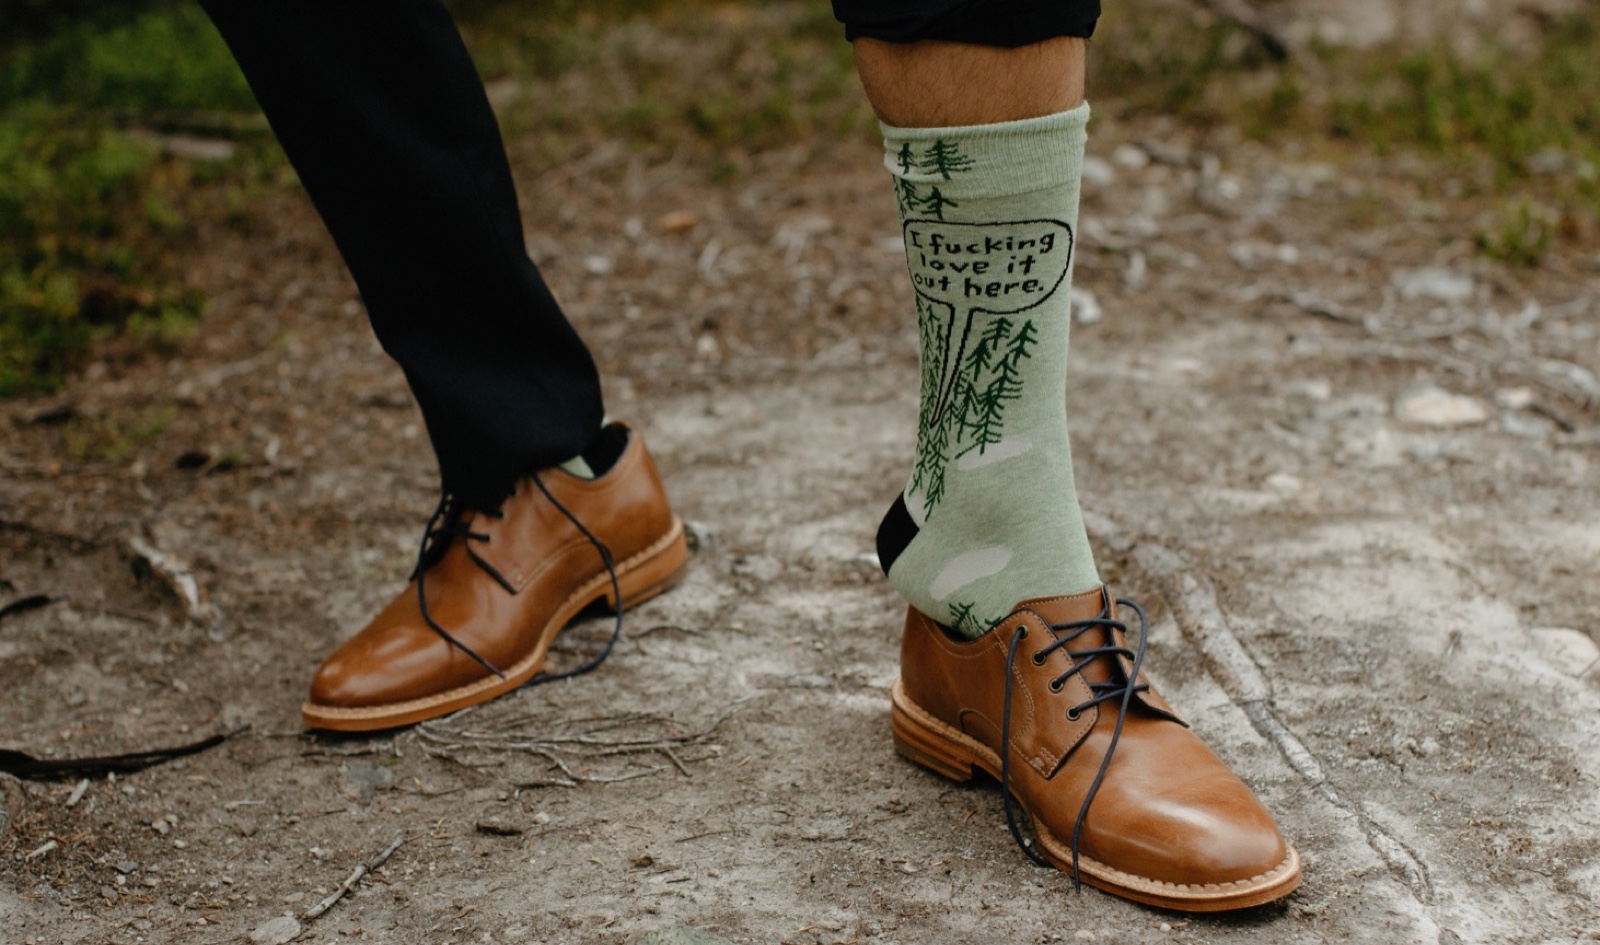 Groom puttin gon green "I fucking love it out here" socks at his backcountry hiking wedding